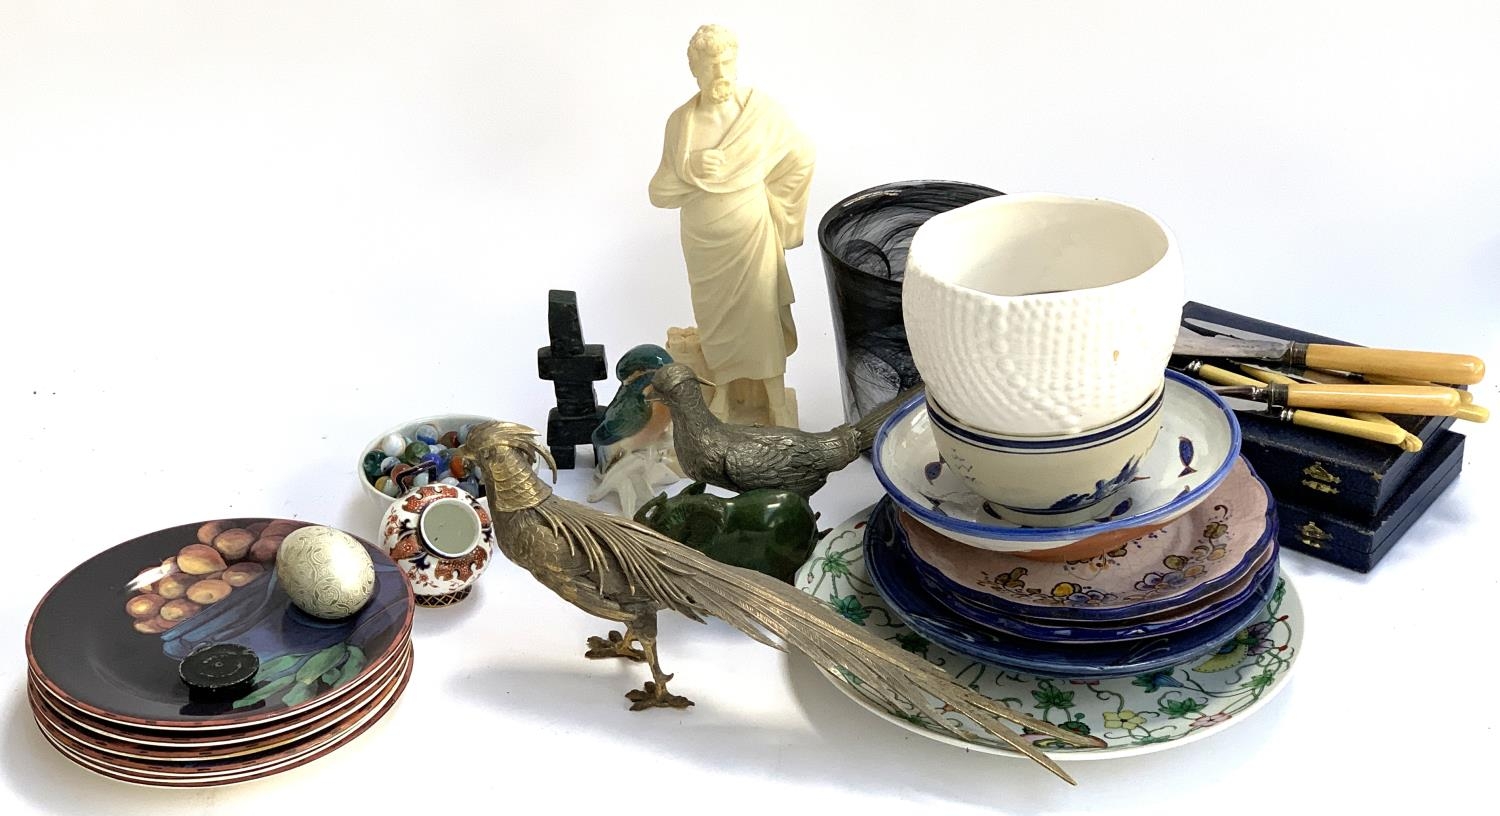 A mixed lot to include plated pheasant figurines; Kingfisher ceramic figure; marbles; Chinese